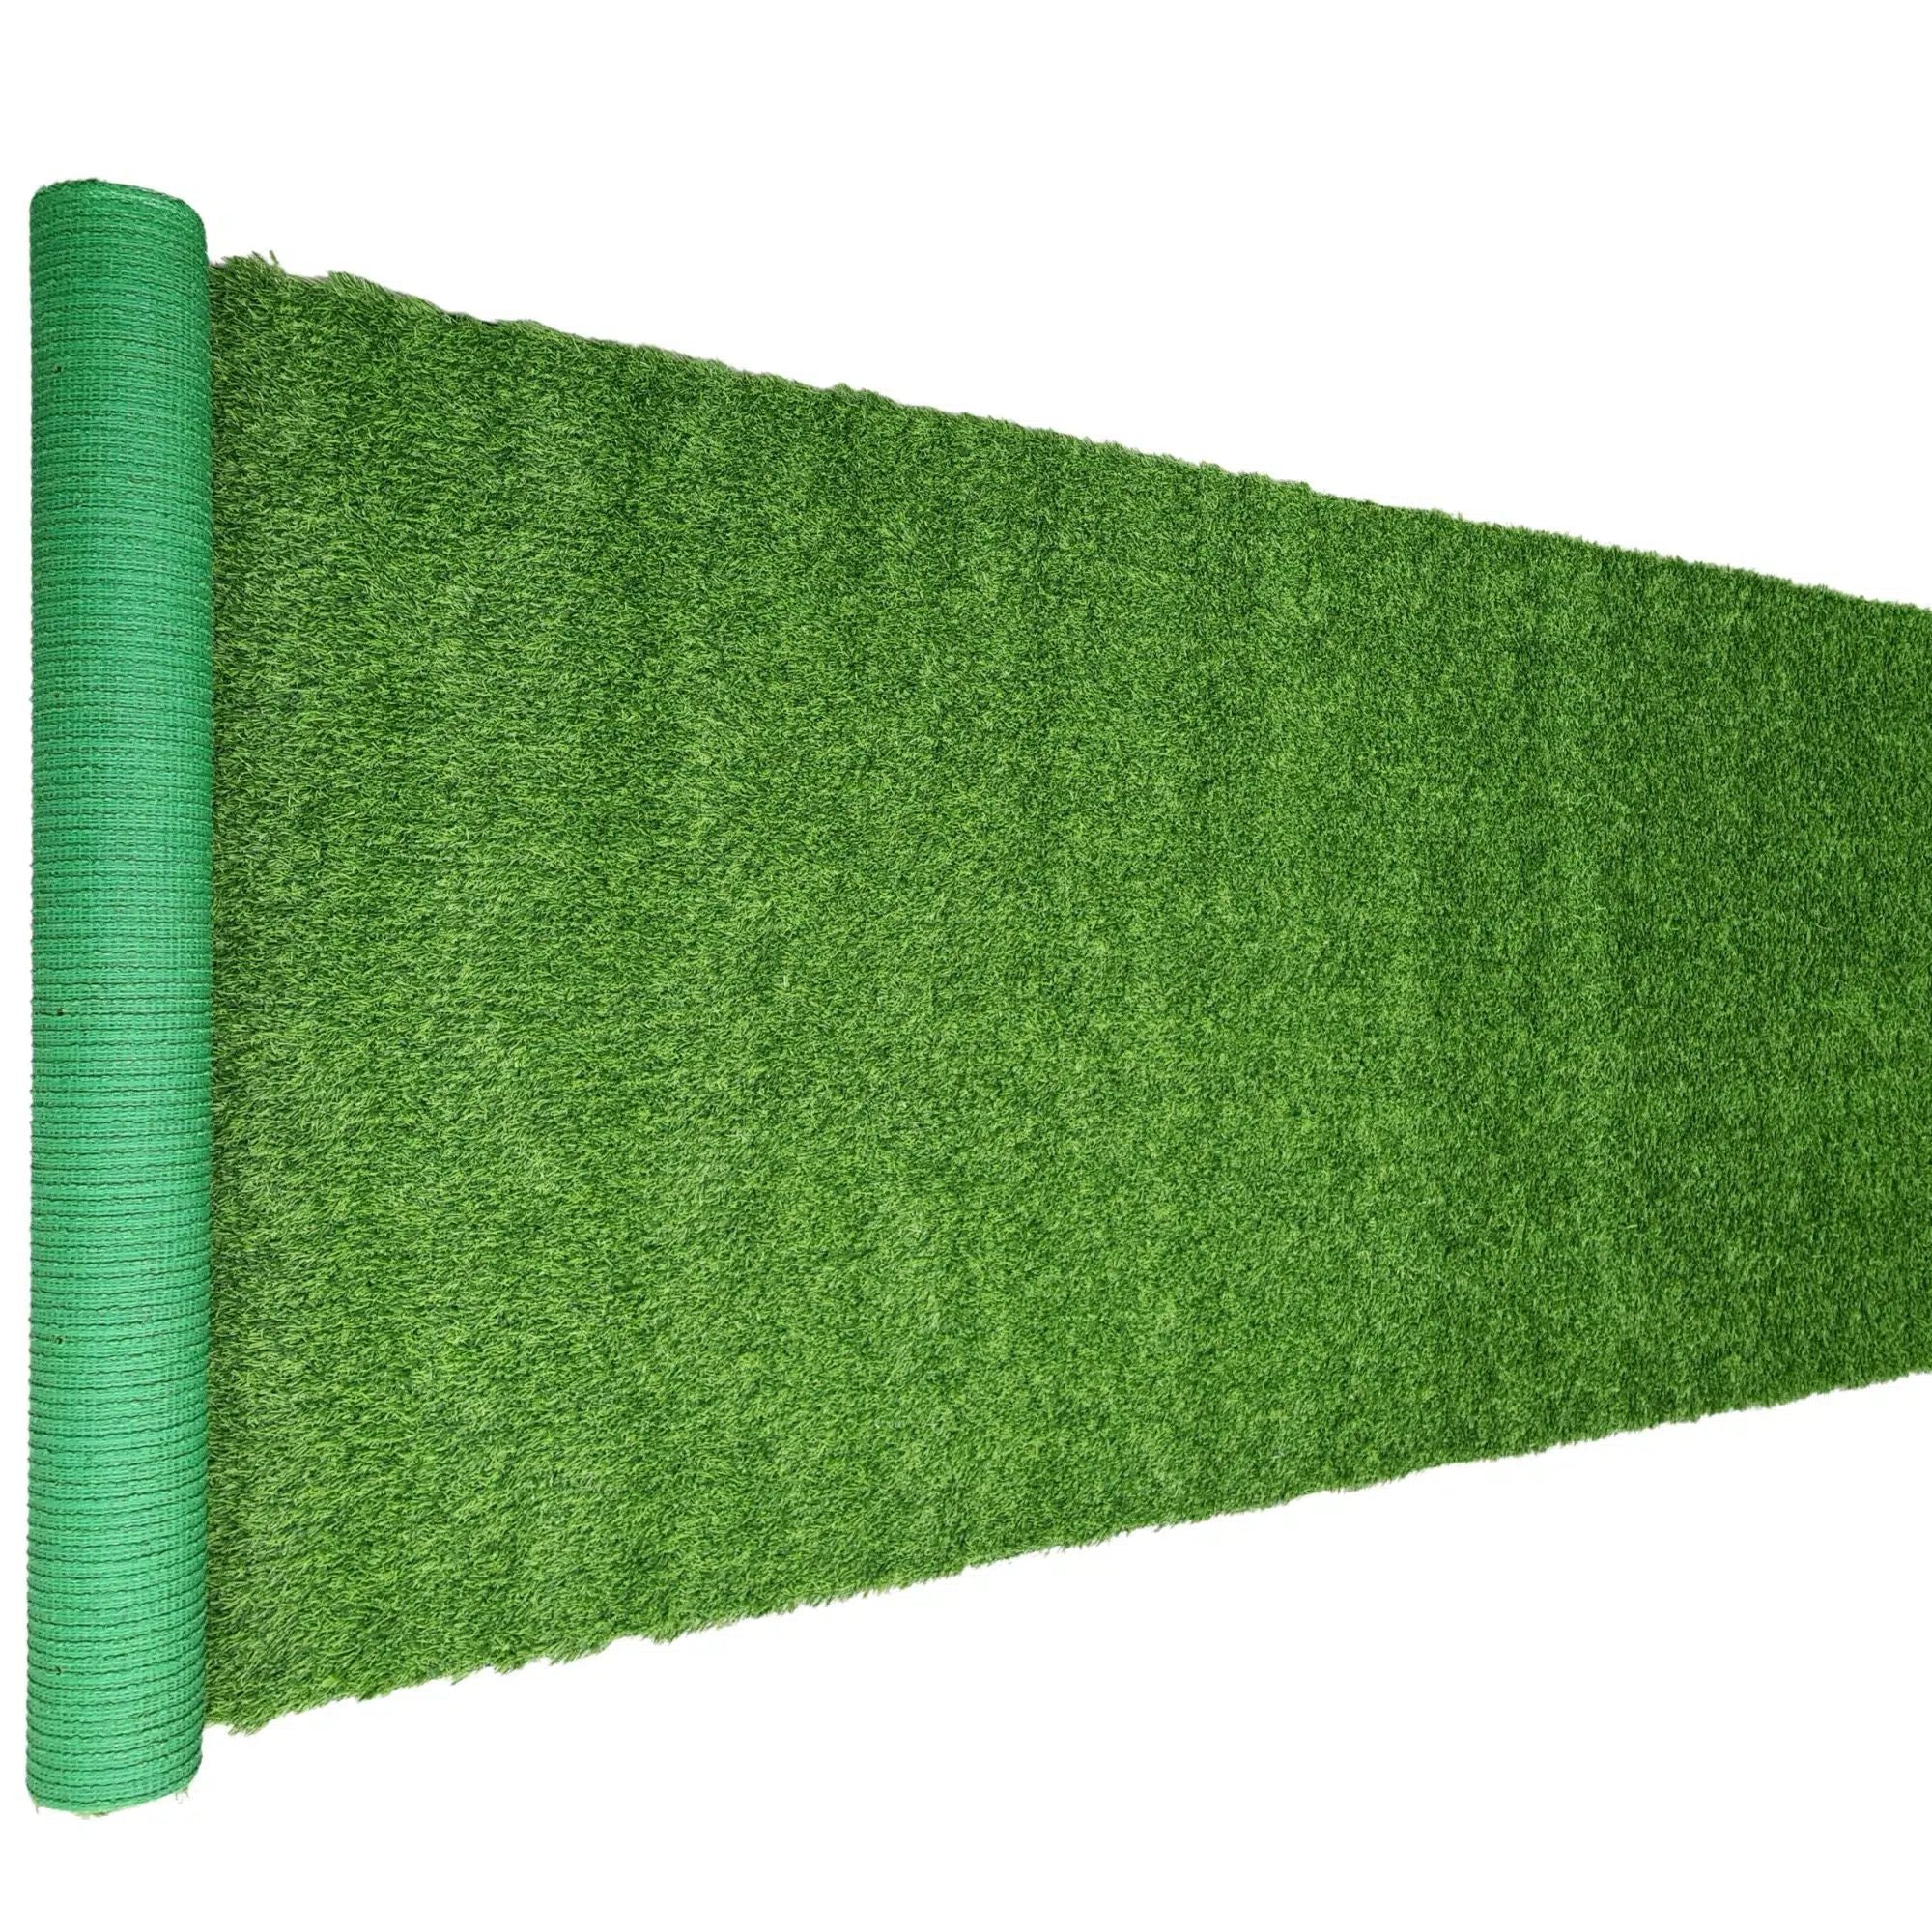 Landscape Series Artificial Grass Roll (Synthetic Grass DIY Turf) Green Backing 3m X 1m